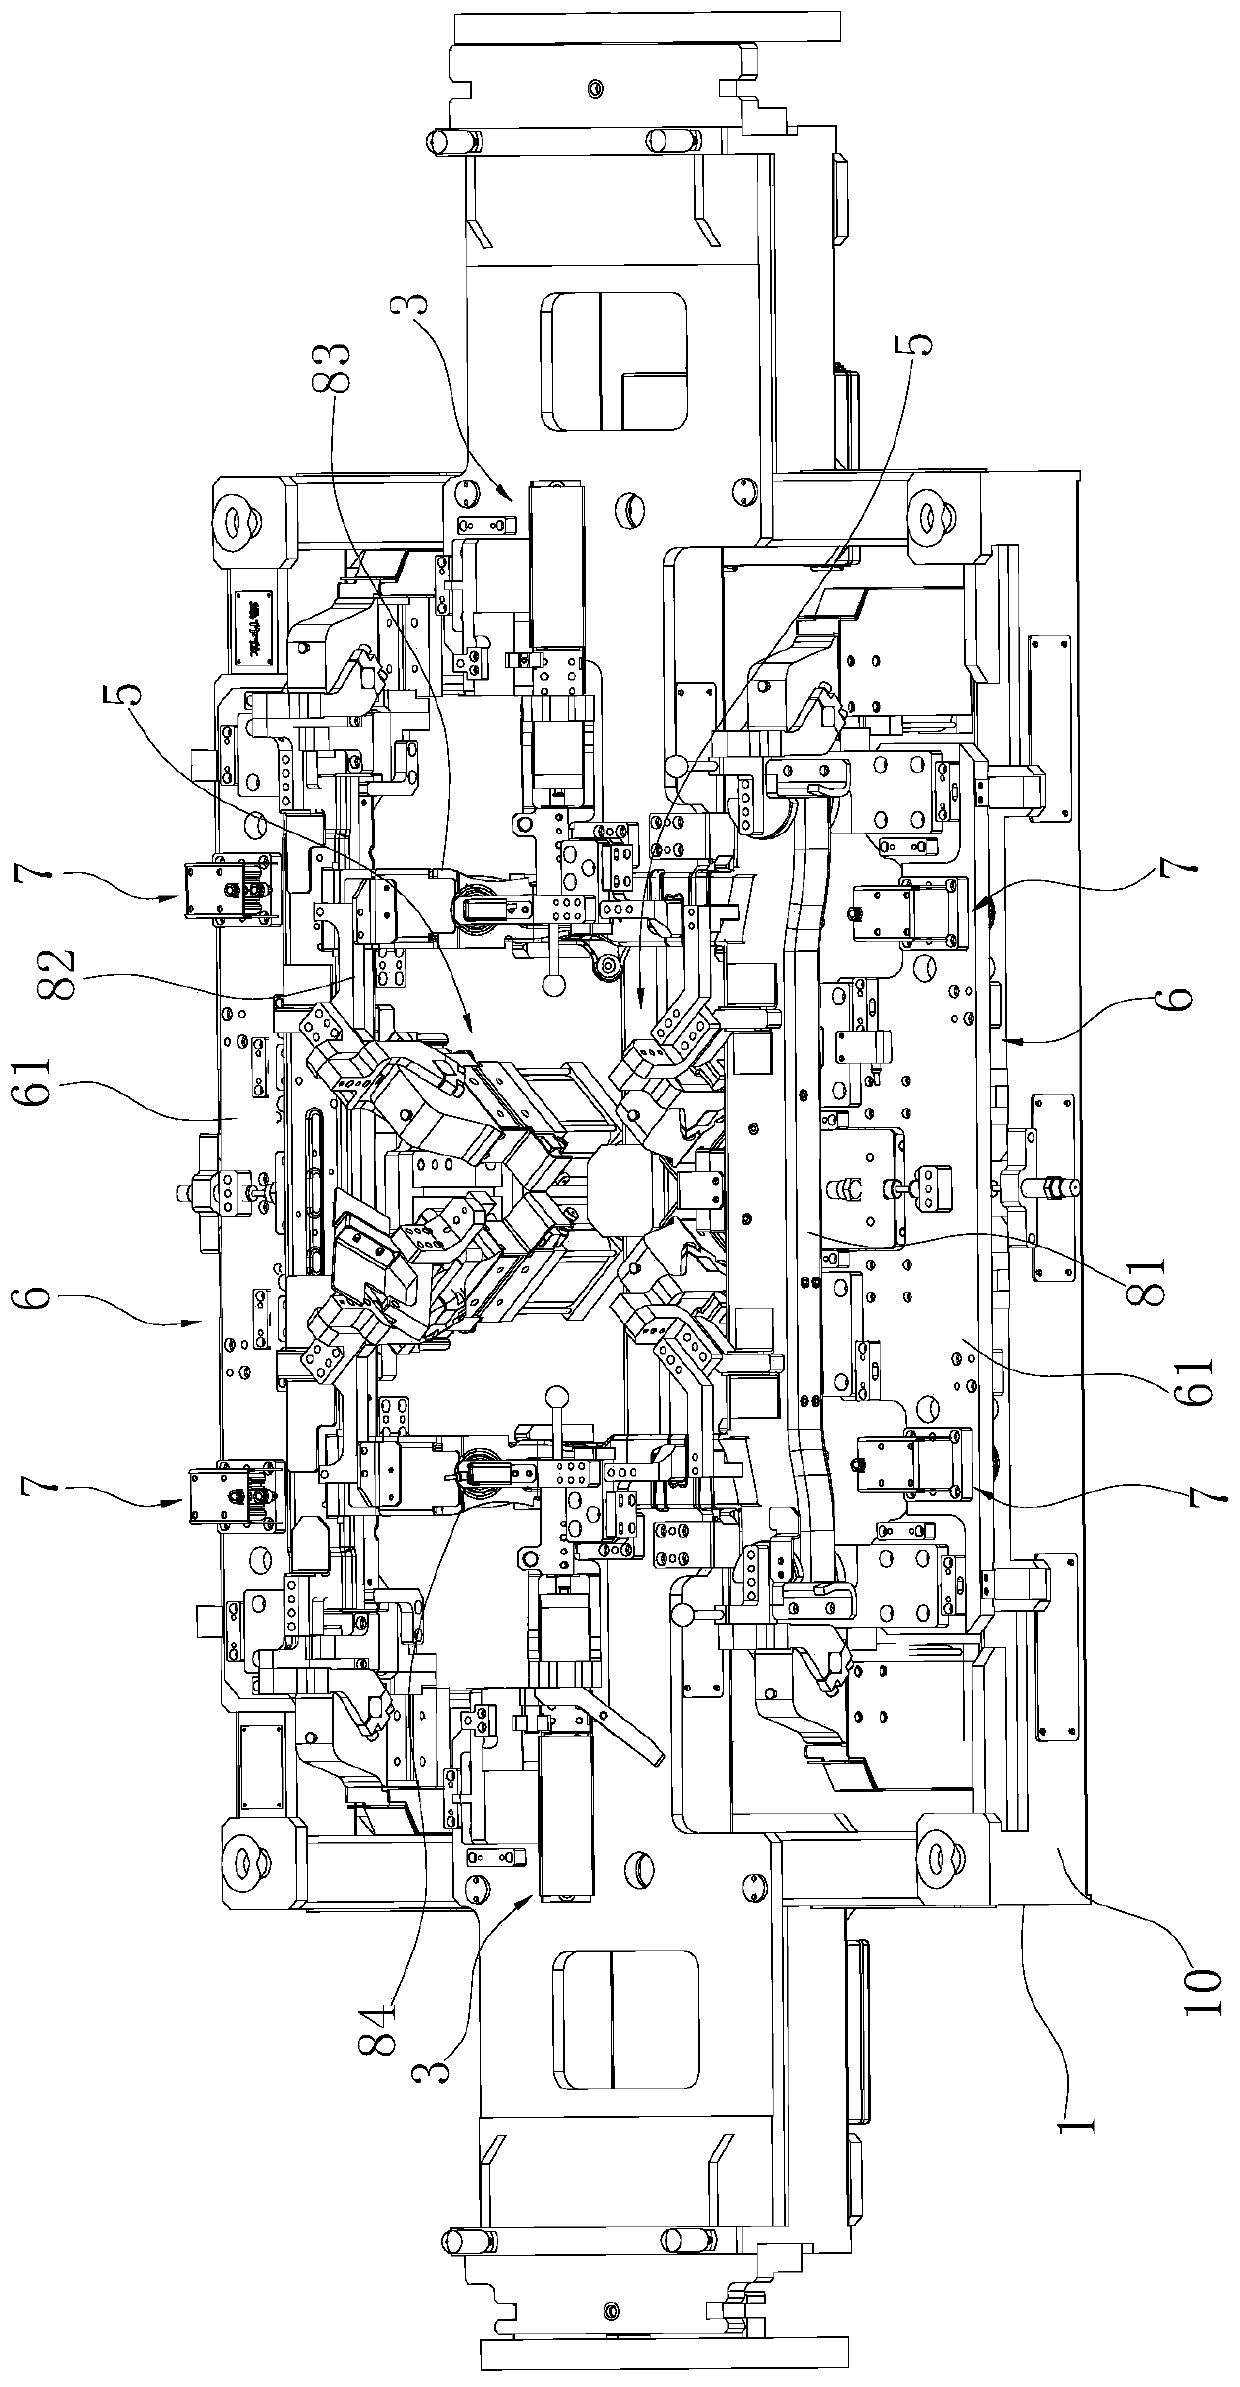 Auxiliary frame positioning and assembling tool